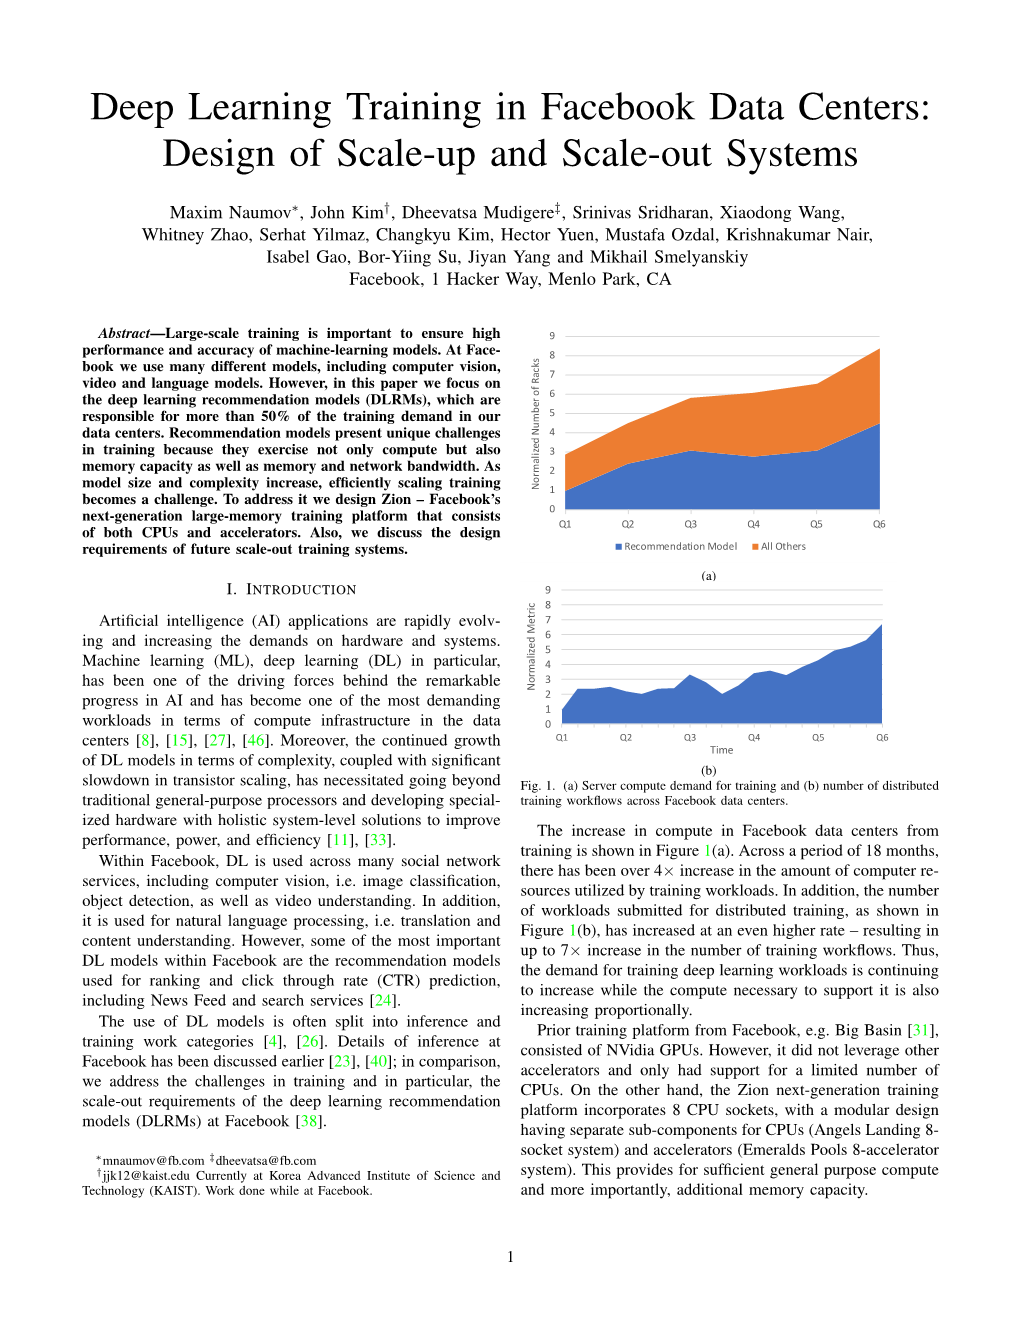 Deep Learning Training in Facebook Data Centers: Design of Scale-Up and Scale-Out Systems